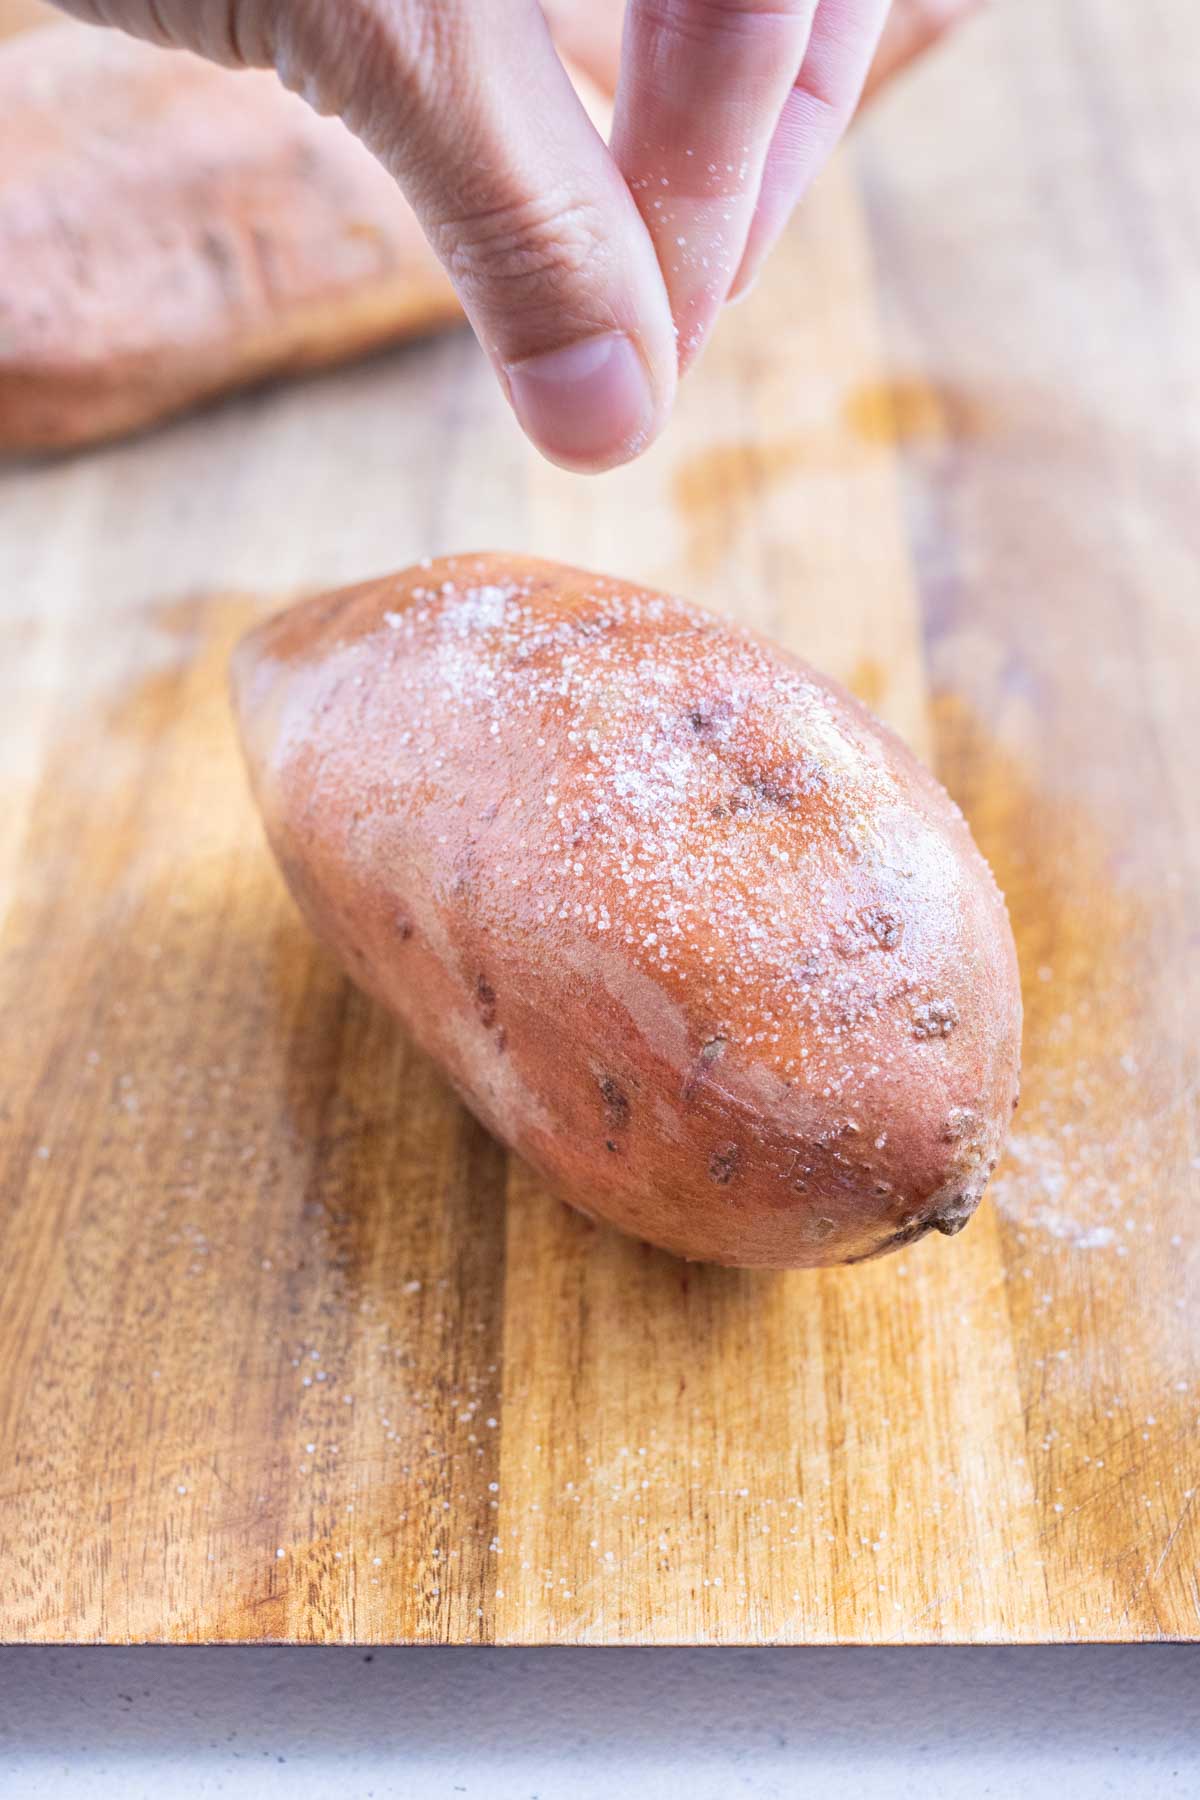 Salt is sprinkled on the outside of a sweet potato.